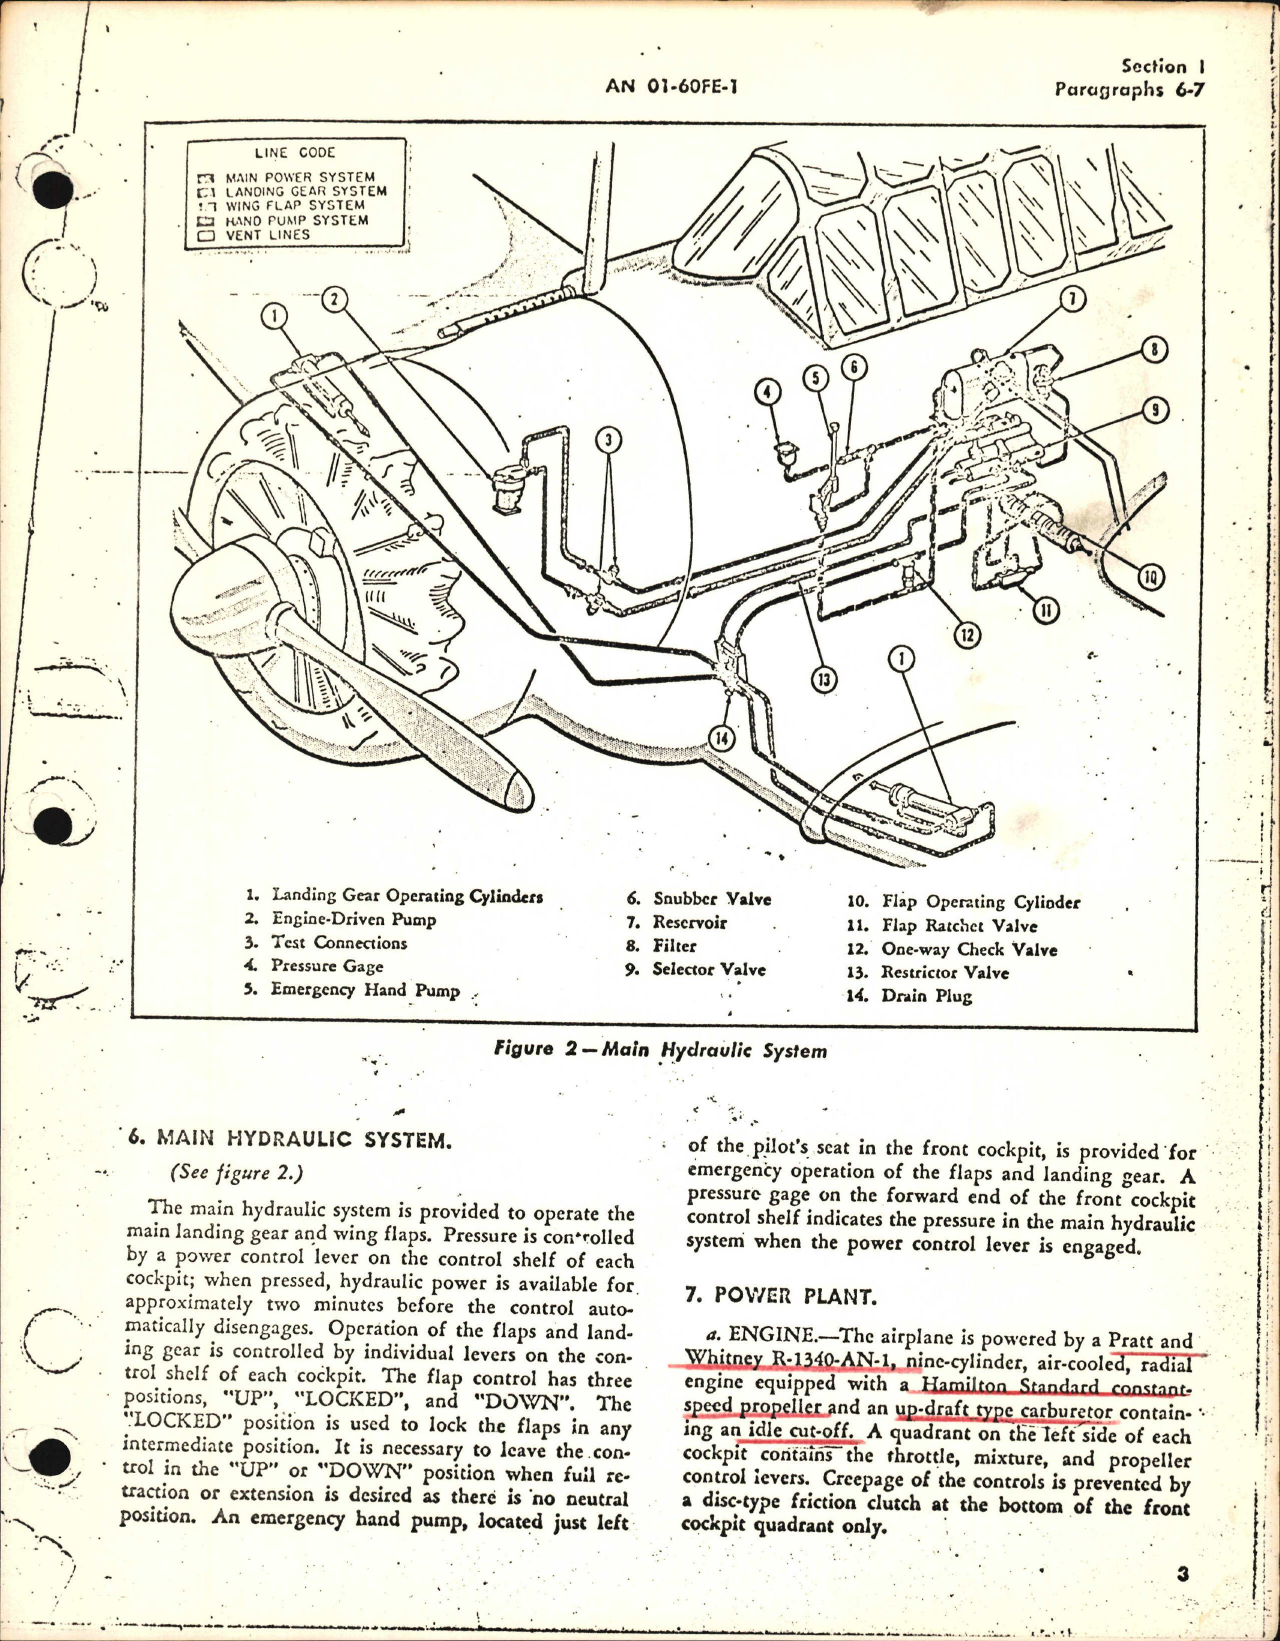 Sample page 5 from AirCorps Library document: Pilot's Flight Operating Instructions for AT-6C